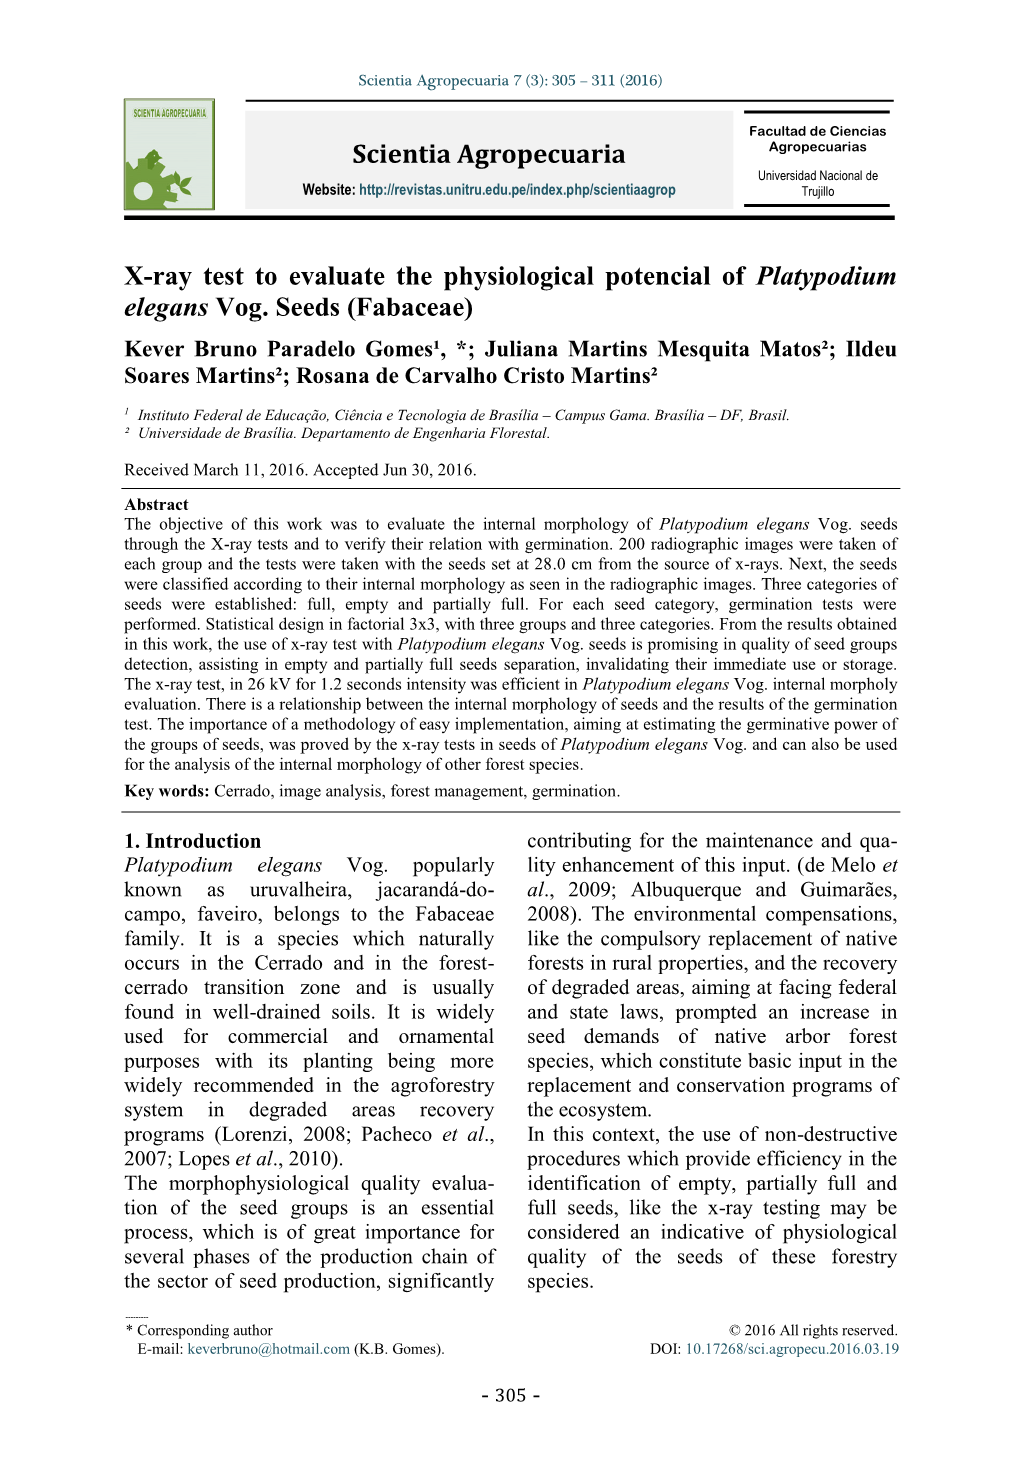 X-Ray Test to Evaluate the Physiological Potencial of Platypodium Elegans Vog